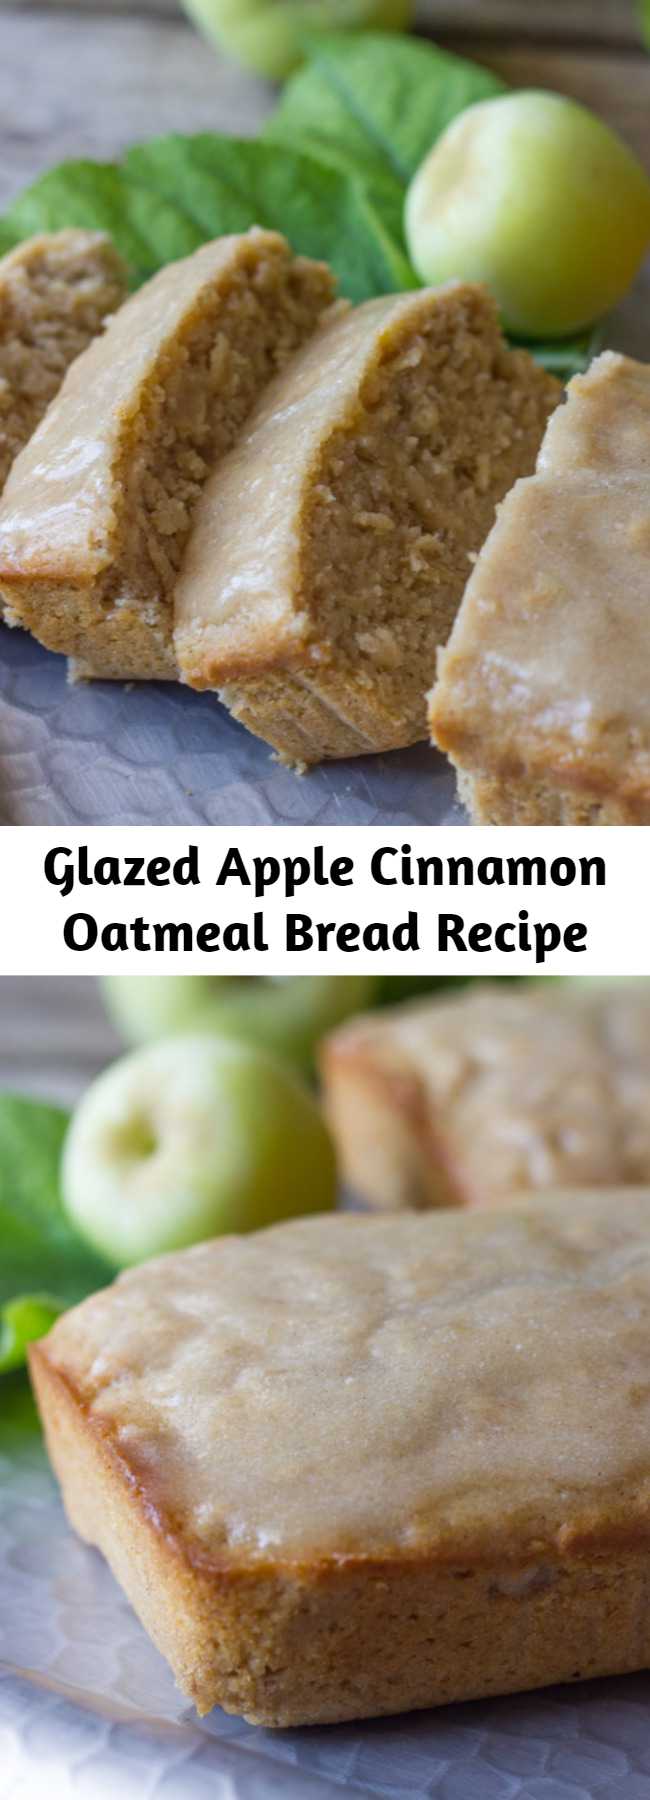 Glazed Apple Cinnamon Oatmeal Bread Recipe - Apple cinnamon oatmeal bread is slightly sweet, has nice chunks of apples, and the oats give it a great consistency. This makes a hearty, tasty breakfast.